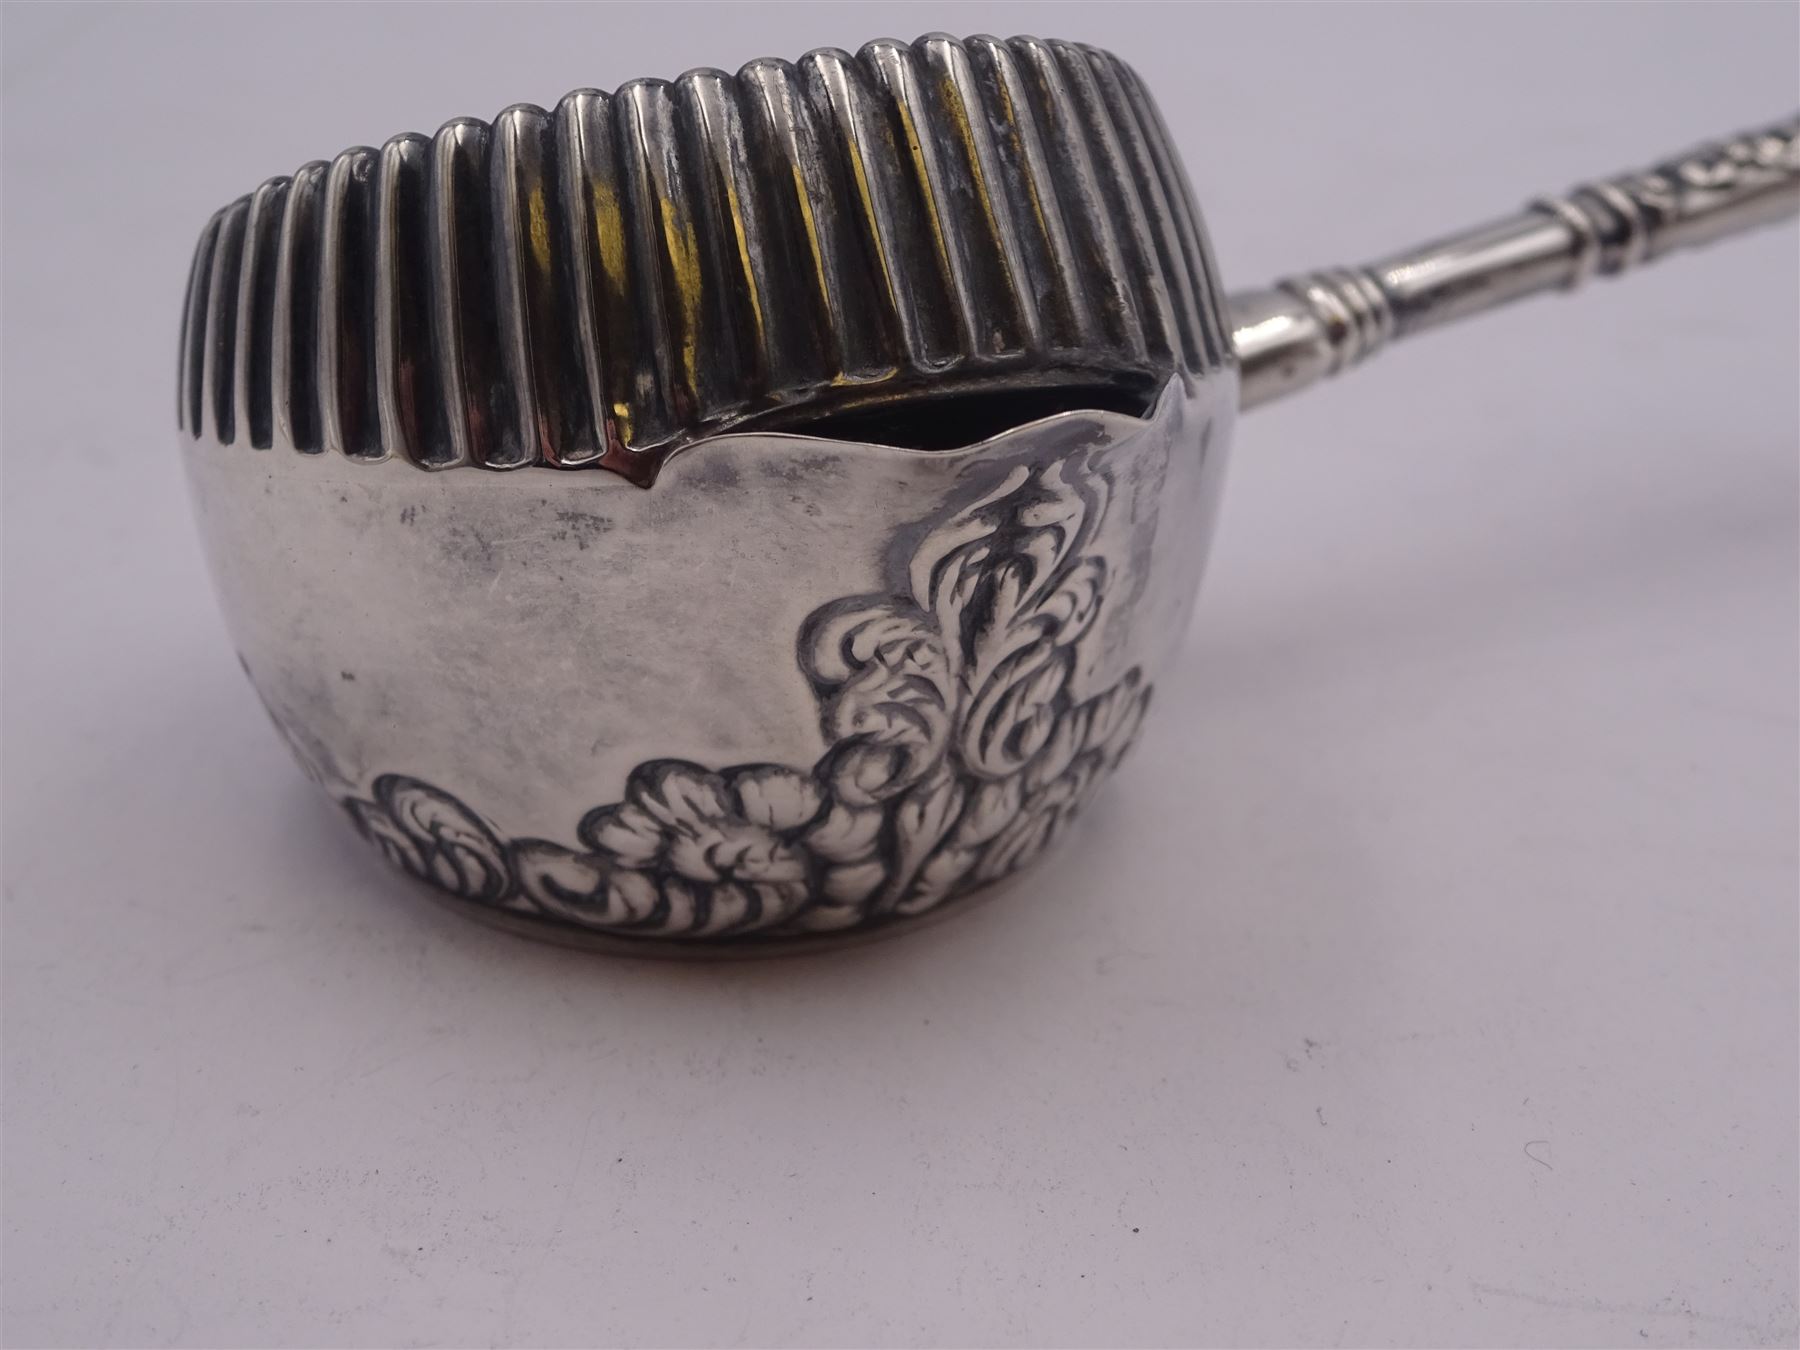 Late 19th century American silver strainer - Image 5 of 9